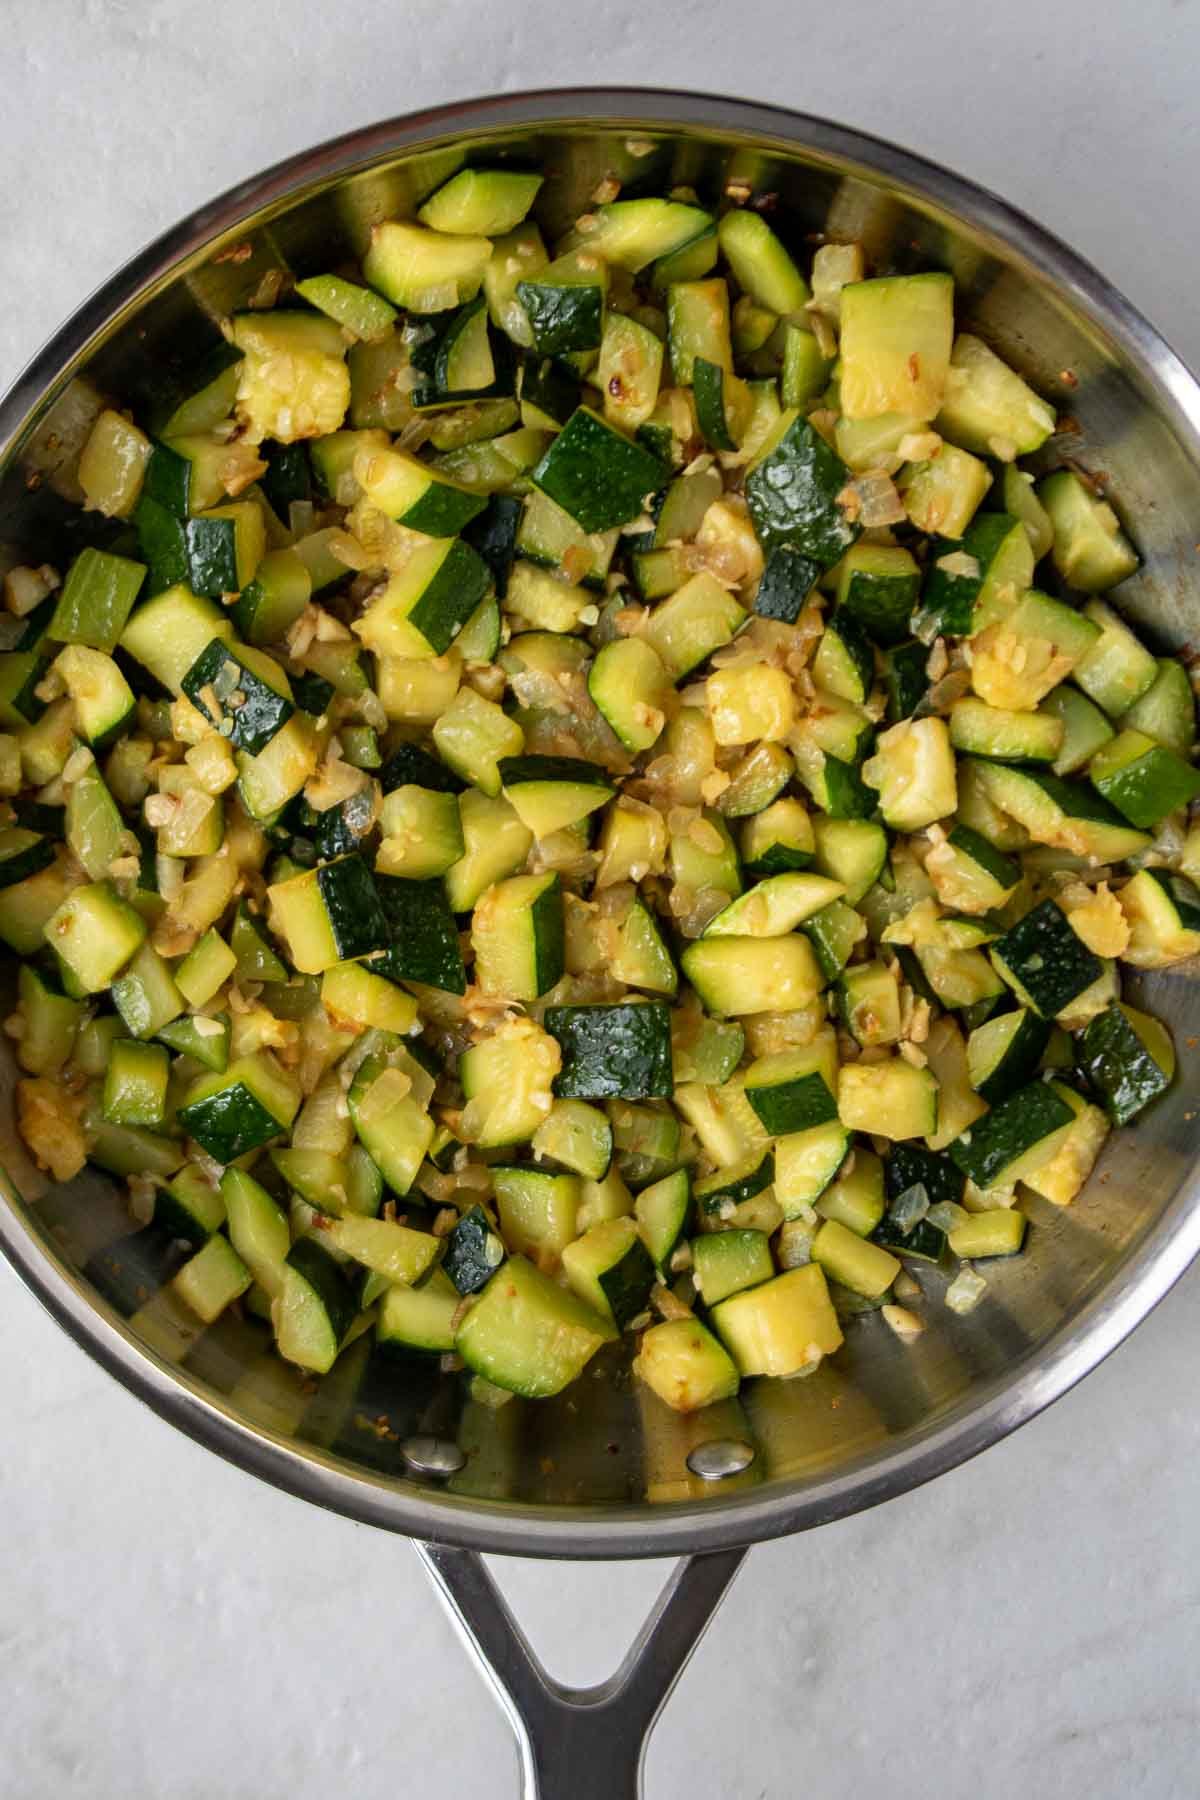 Cooked diced zucchini in a pan with onion and garlic.